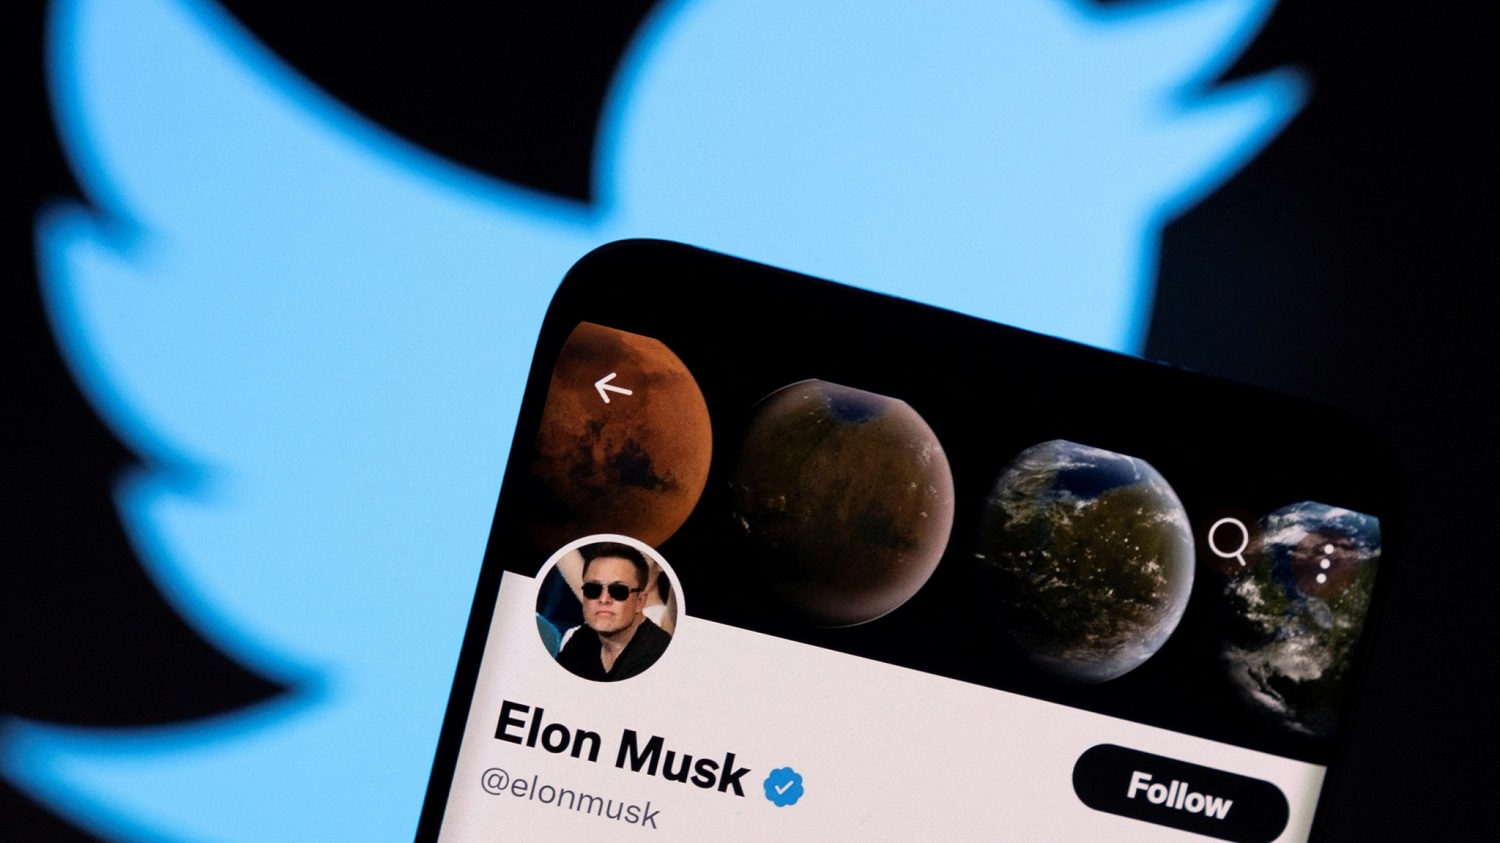 Elon Musk, the new owner of Twitter | AbuzWeb - #1 Web Services Agency based in Benin, Africa and Colorado, USA